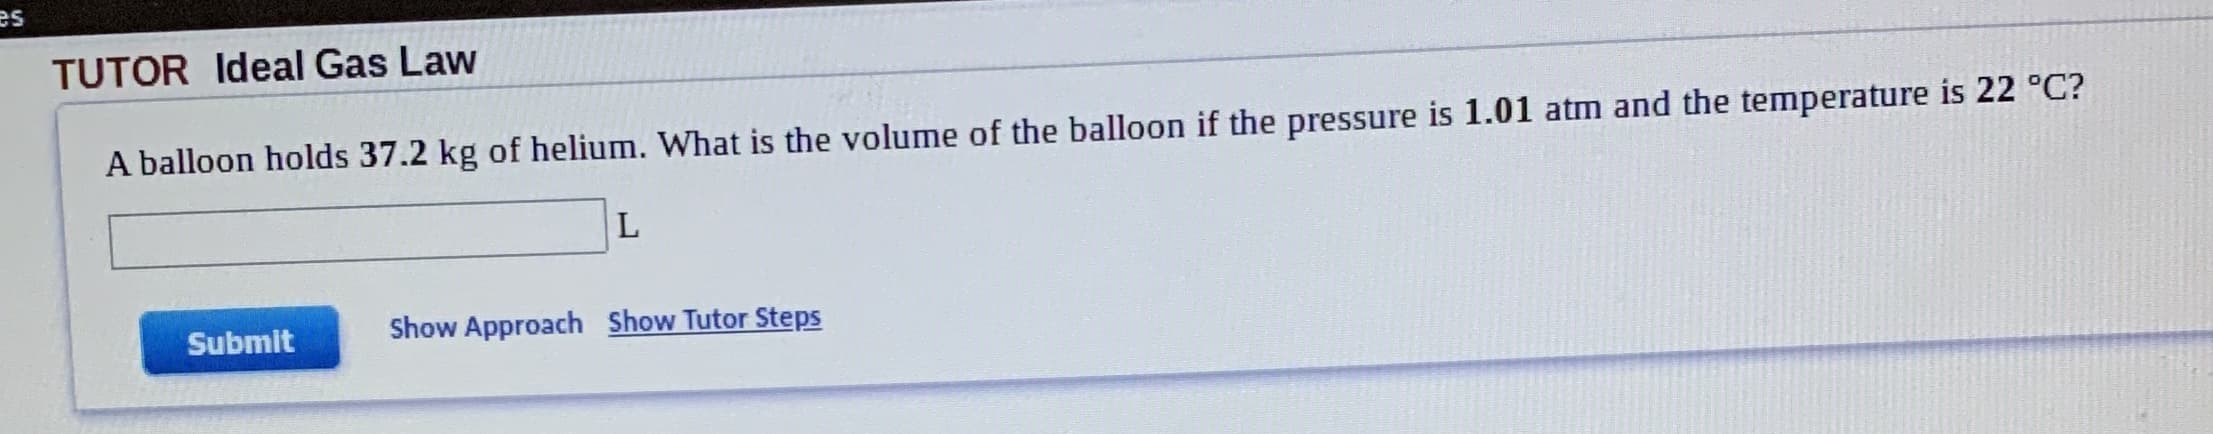 es
TUTOR Ideal Gas Law
A balloon holds 37.2 kg of helium. What is the volume of the balloon if the pressure is 1.01 atm and the temperature is 22 °C?
Show Approach Show Tutor Steps
Submit
